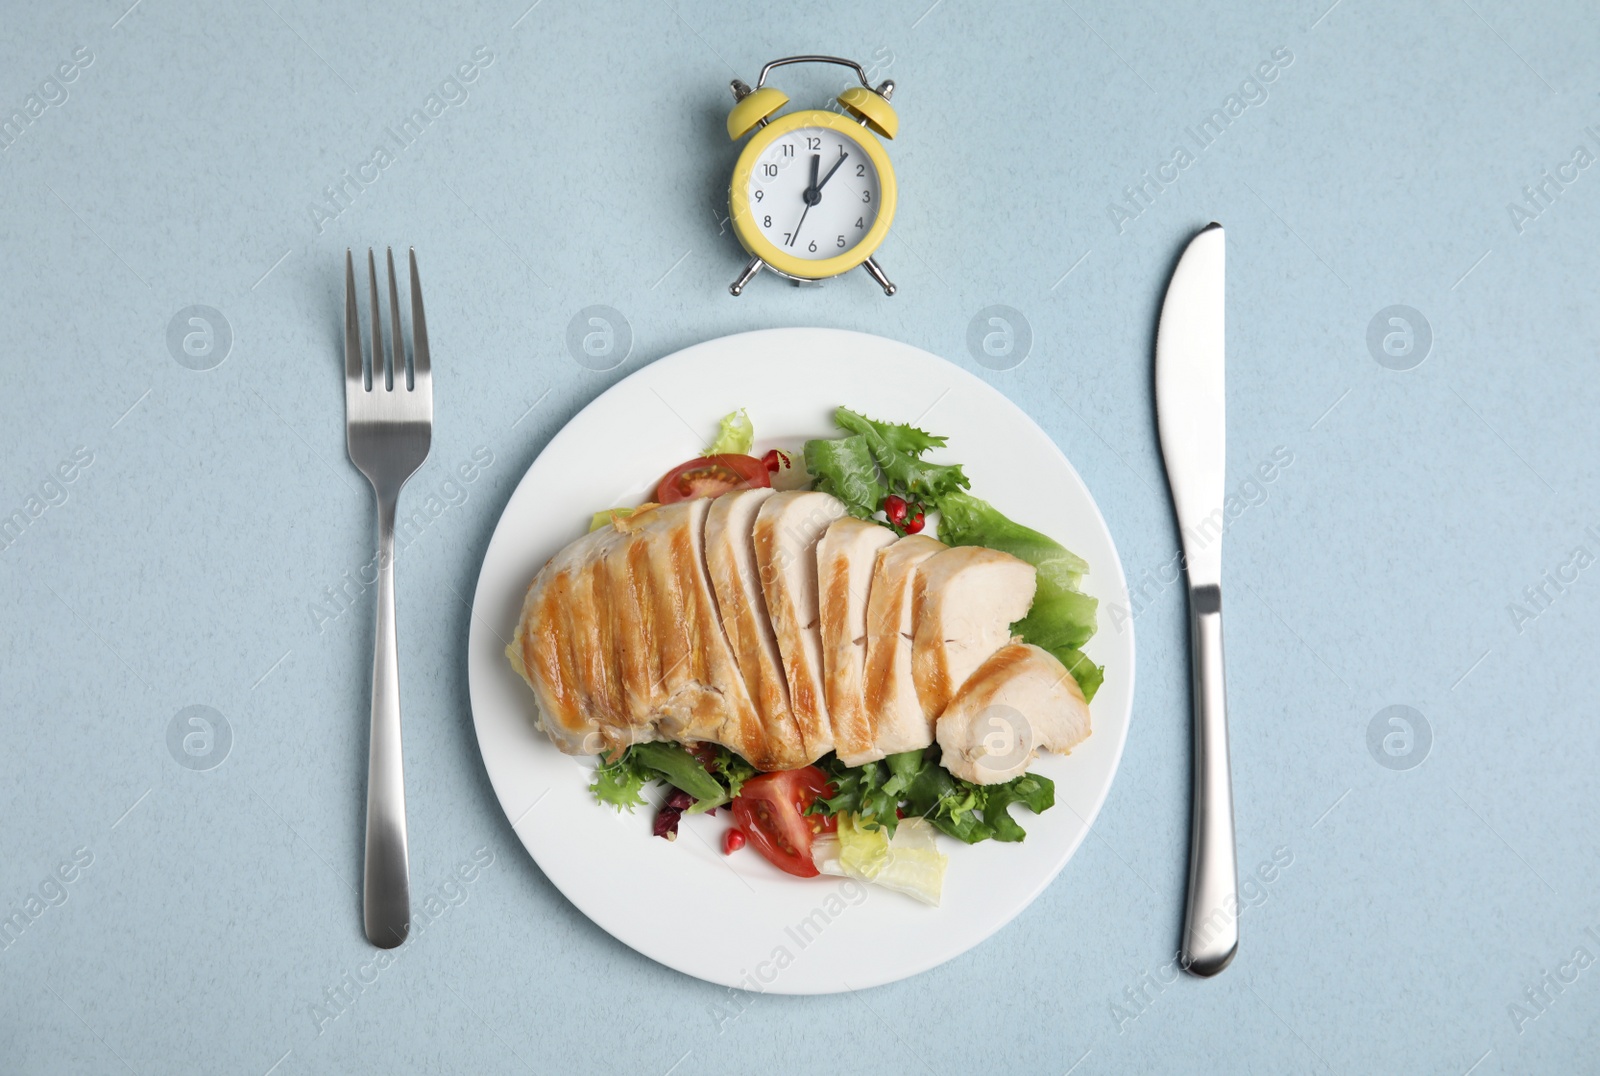 Photo of Plate of appetizing food, alarm clock and cutlery on light blue table, flat lay. Nutrition regime